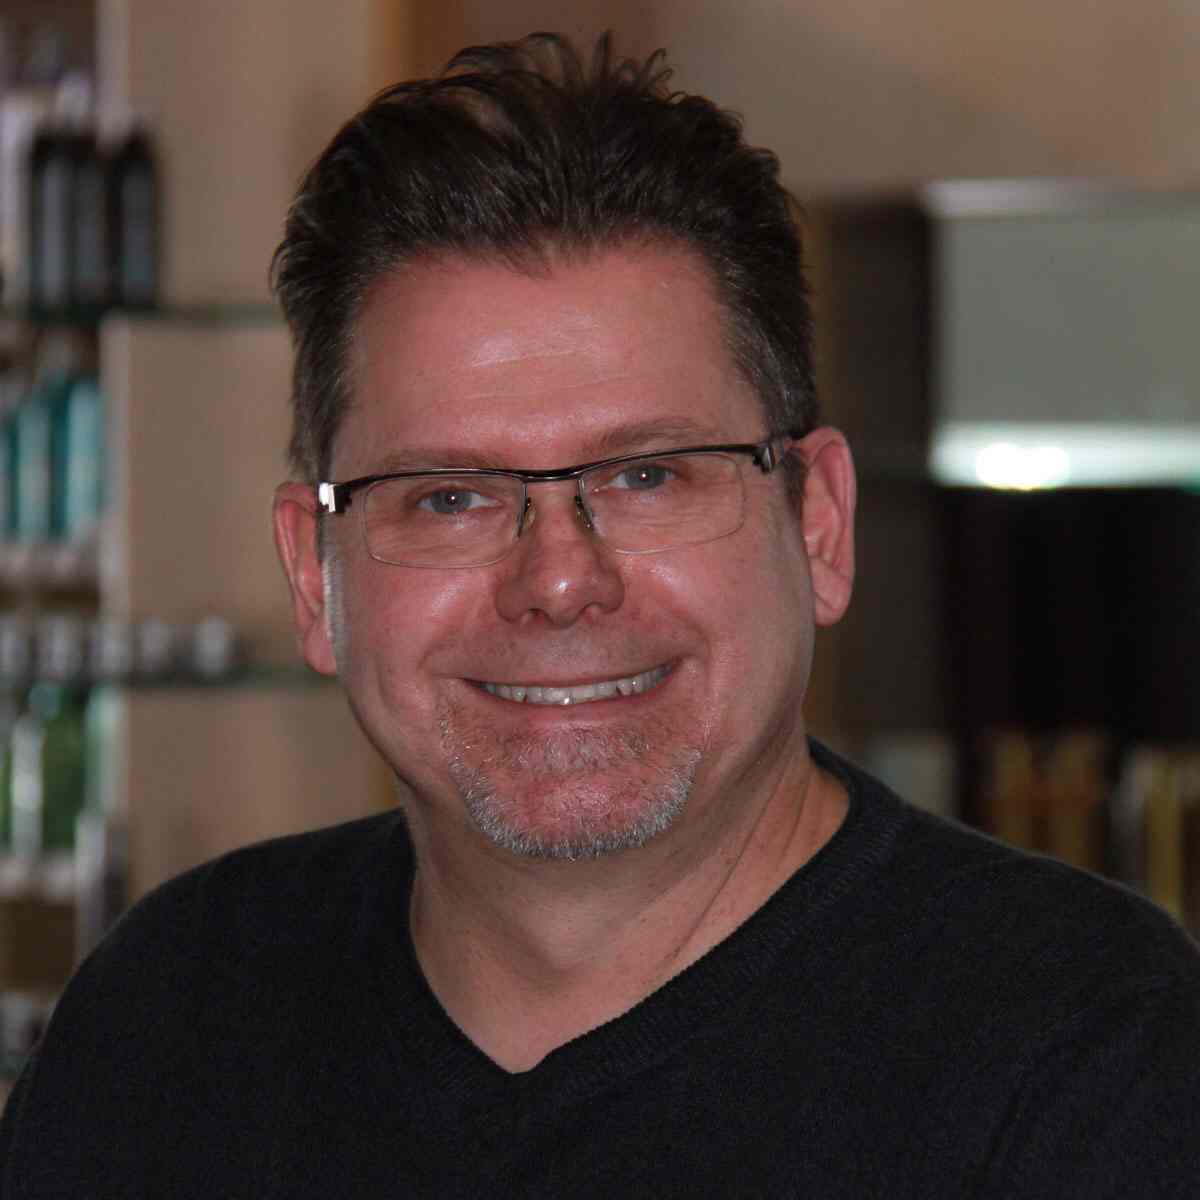 This is your Master Barber, Greg Zrust - a0aa02d3-8b5d-4eeb-bfba-7c90478f4725